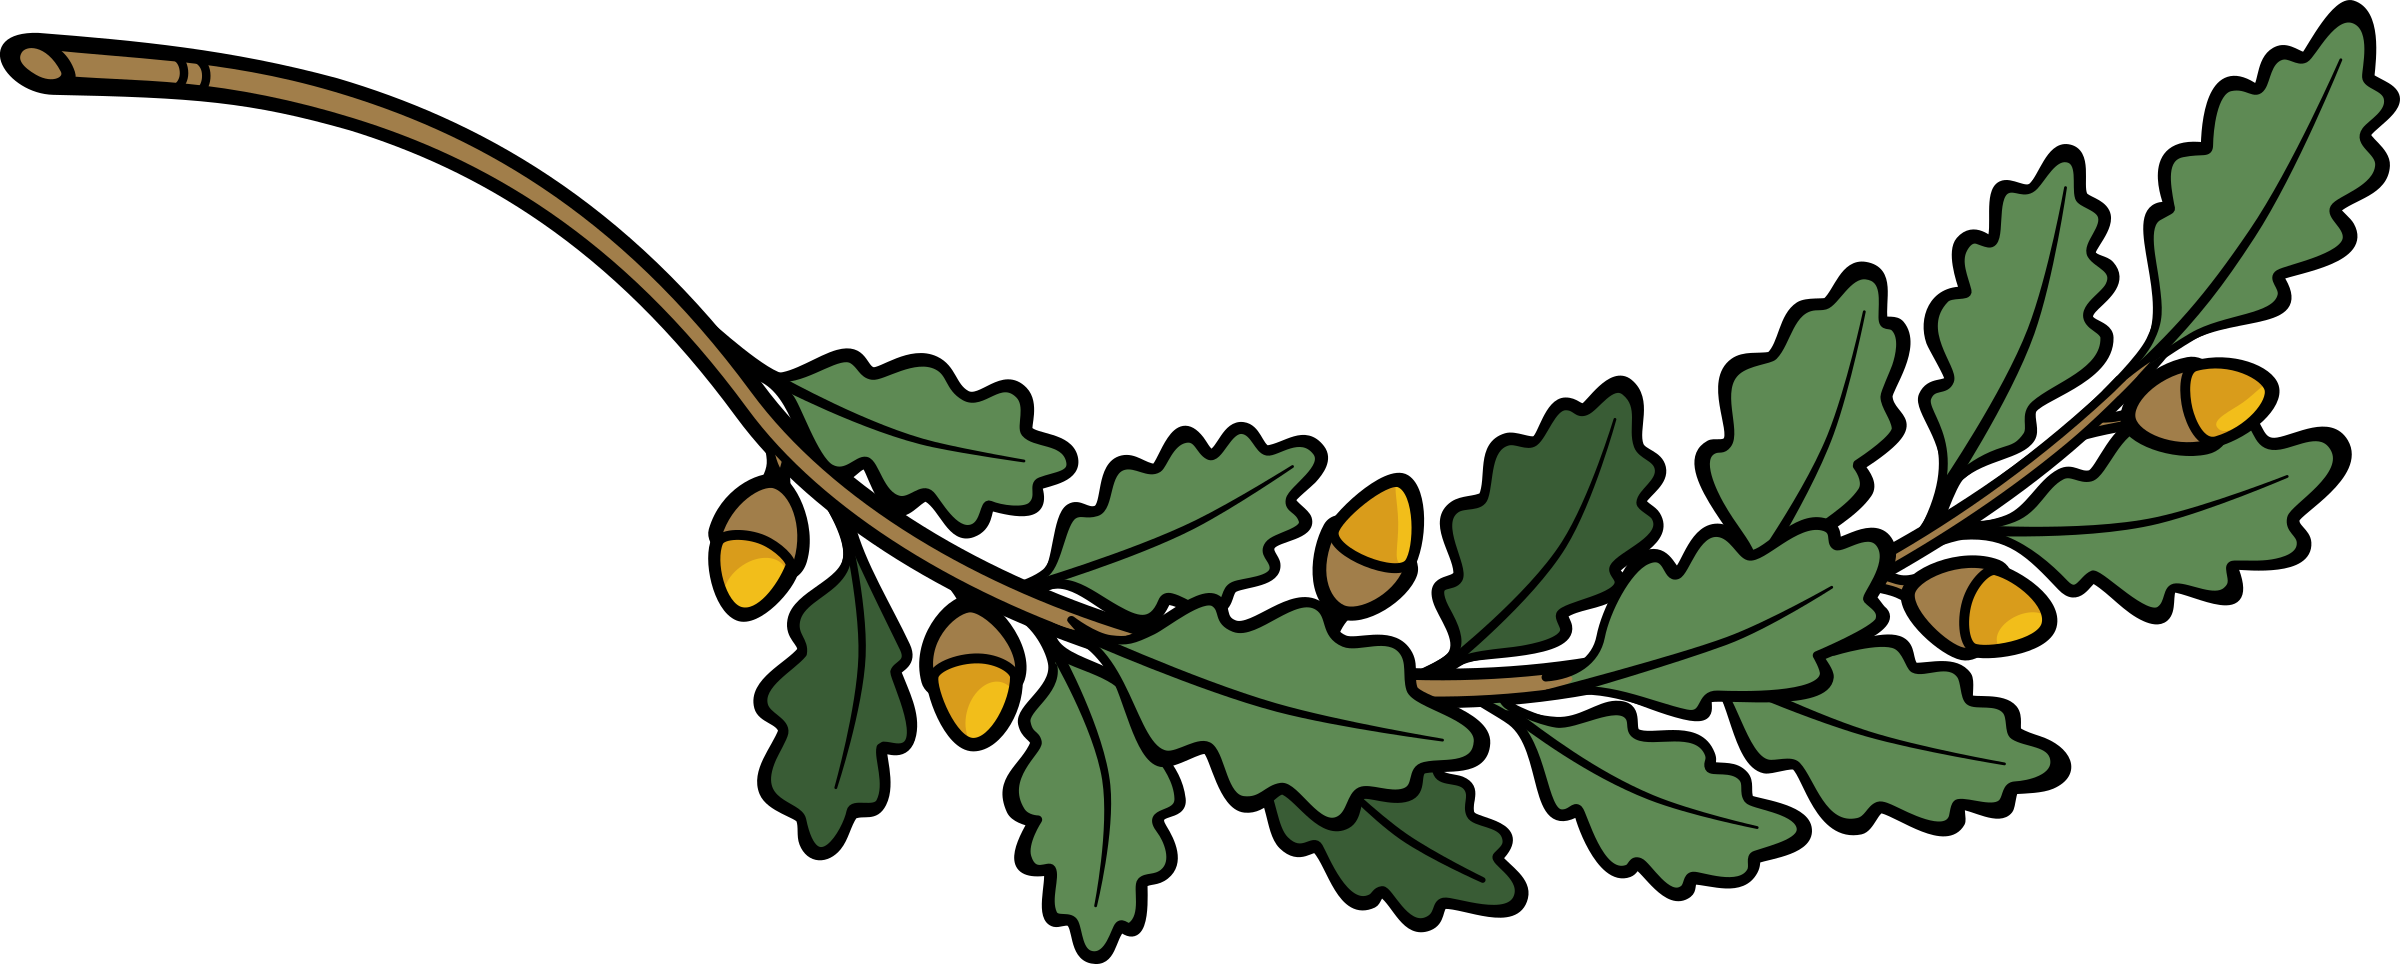 Branch Clipart Oak Branch Pencil And In Color Branch - Oak Branch Free Vector (2400x964)